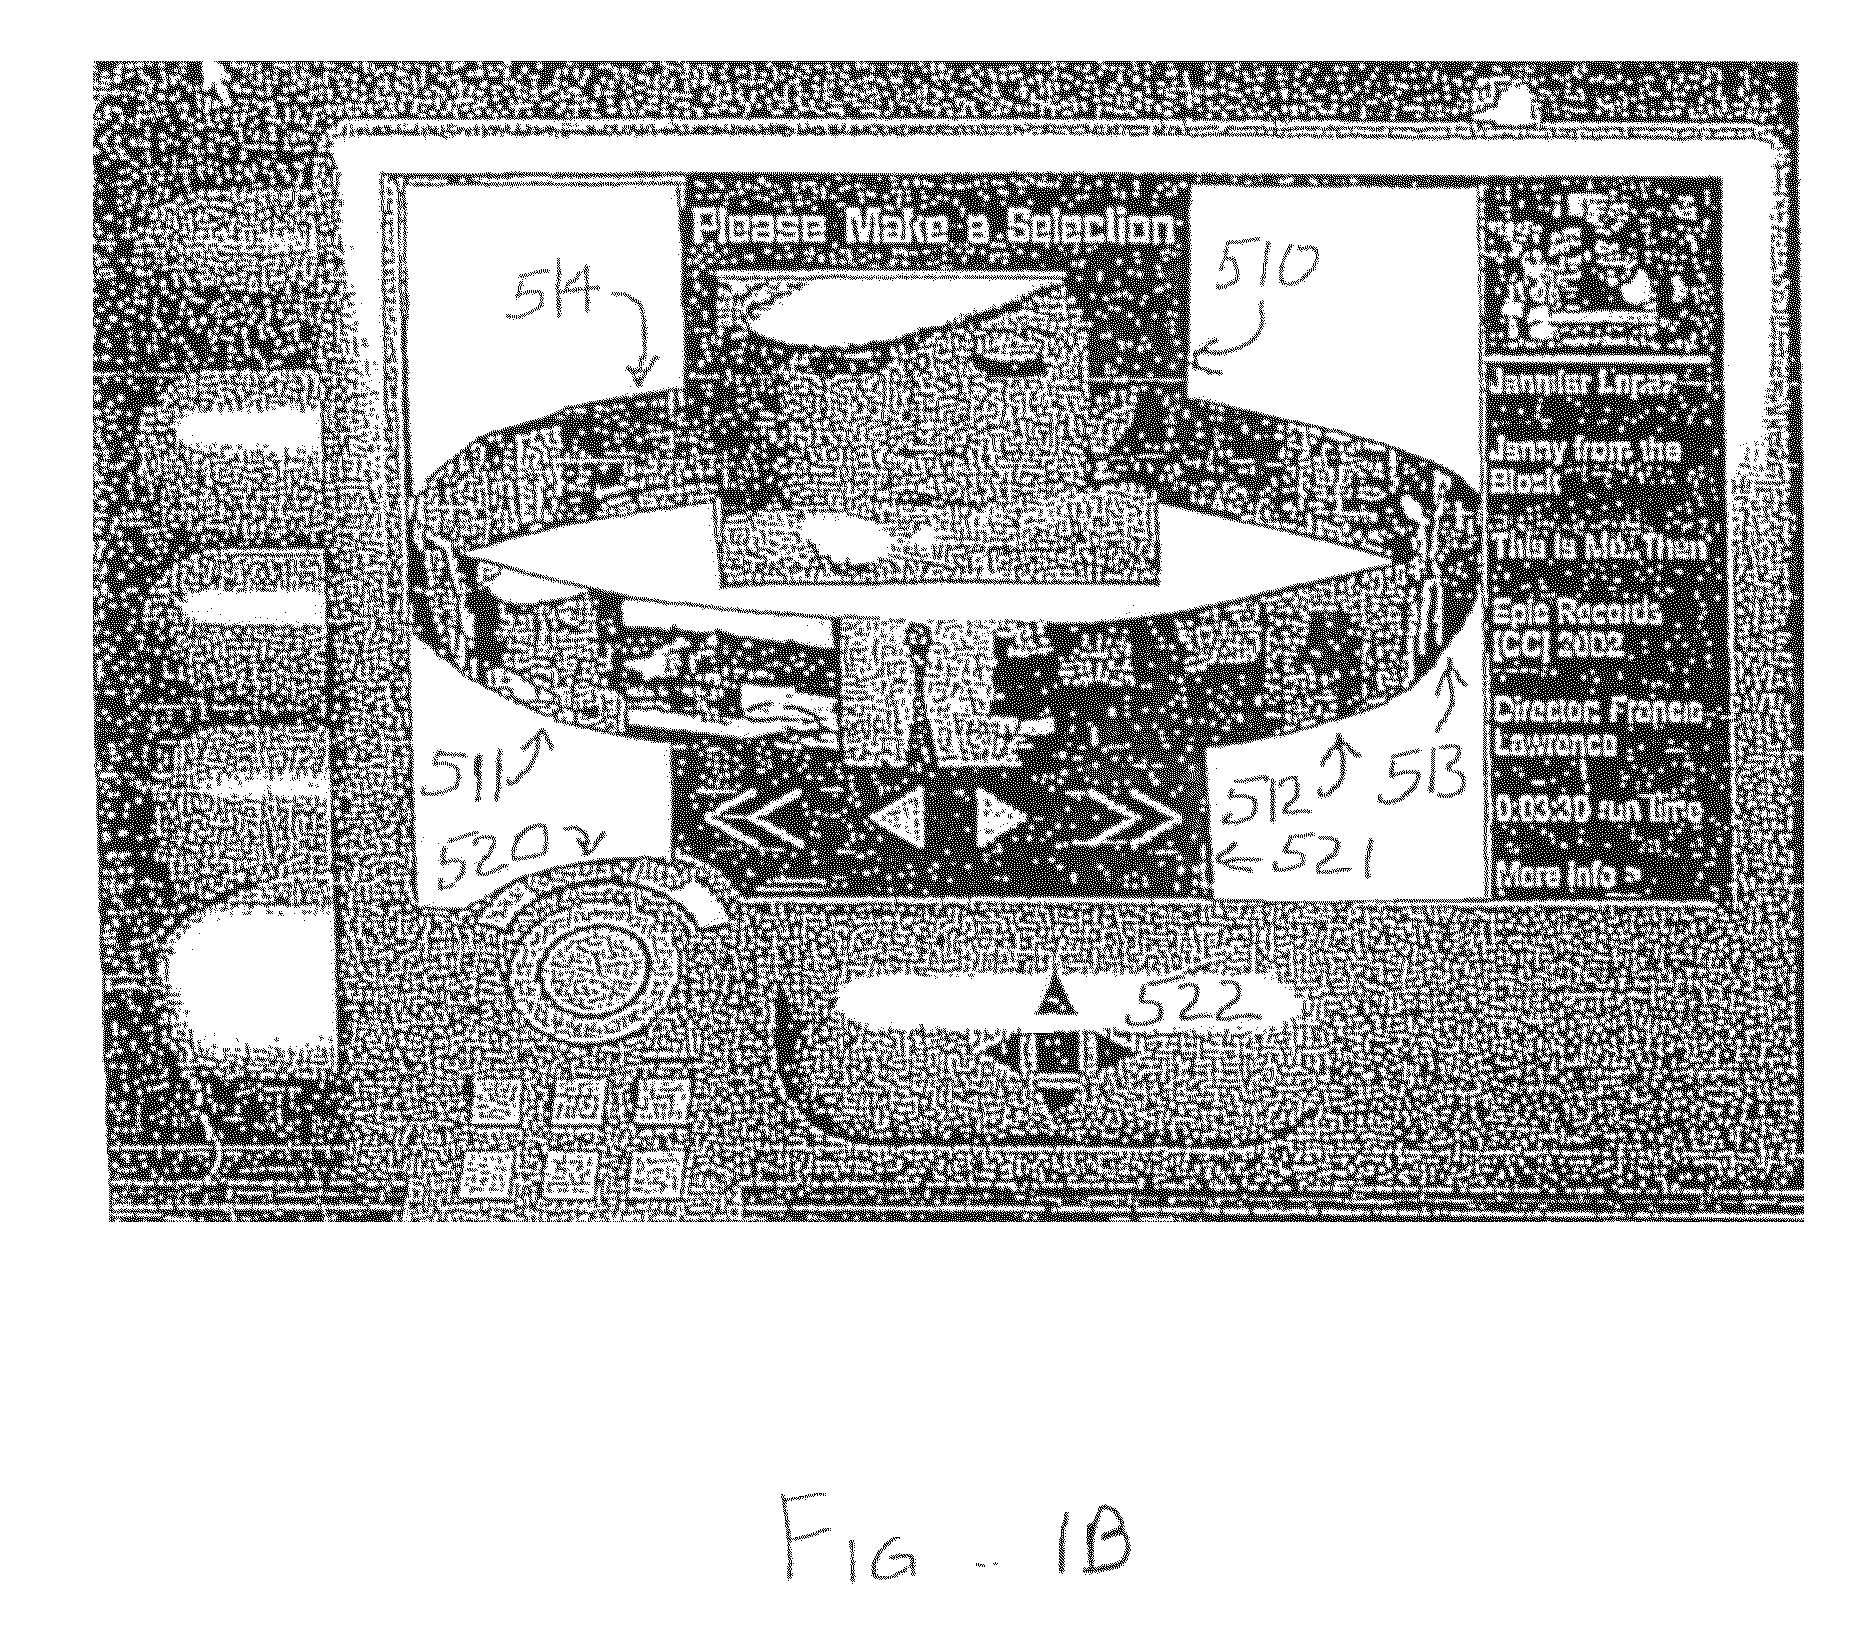 Video perspective navigation system and method